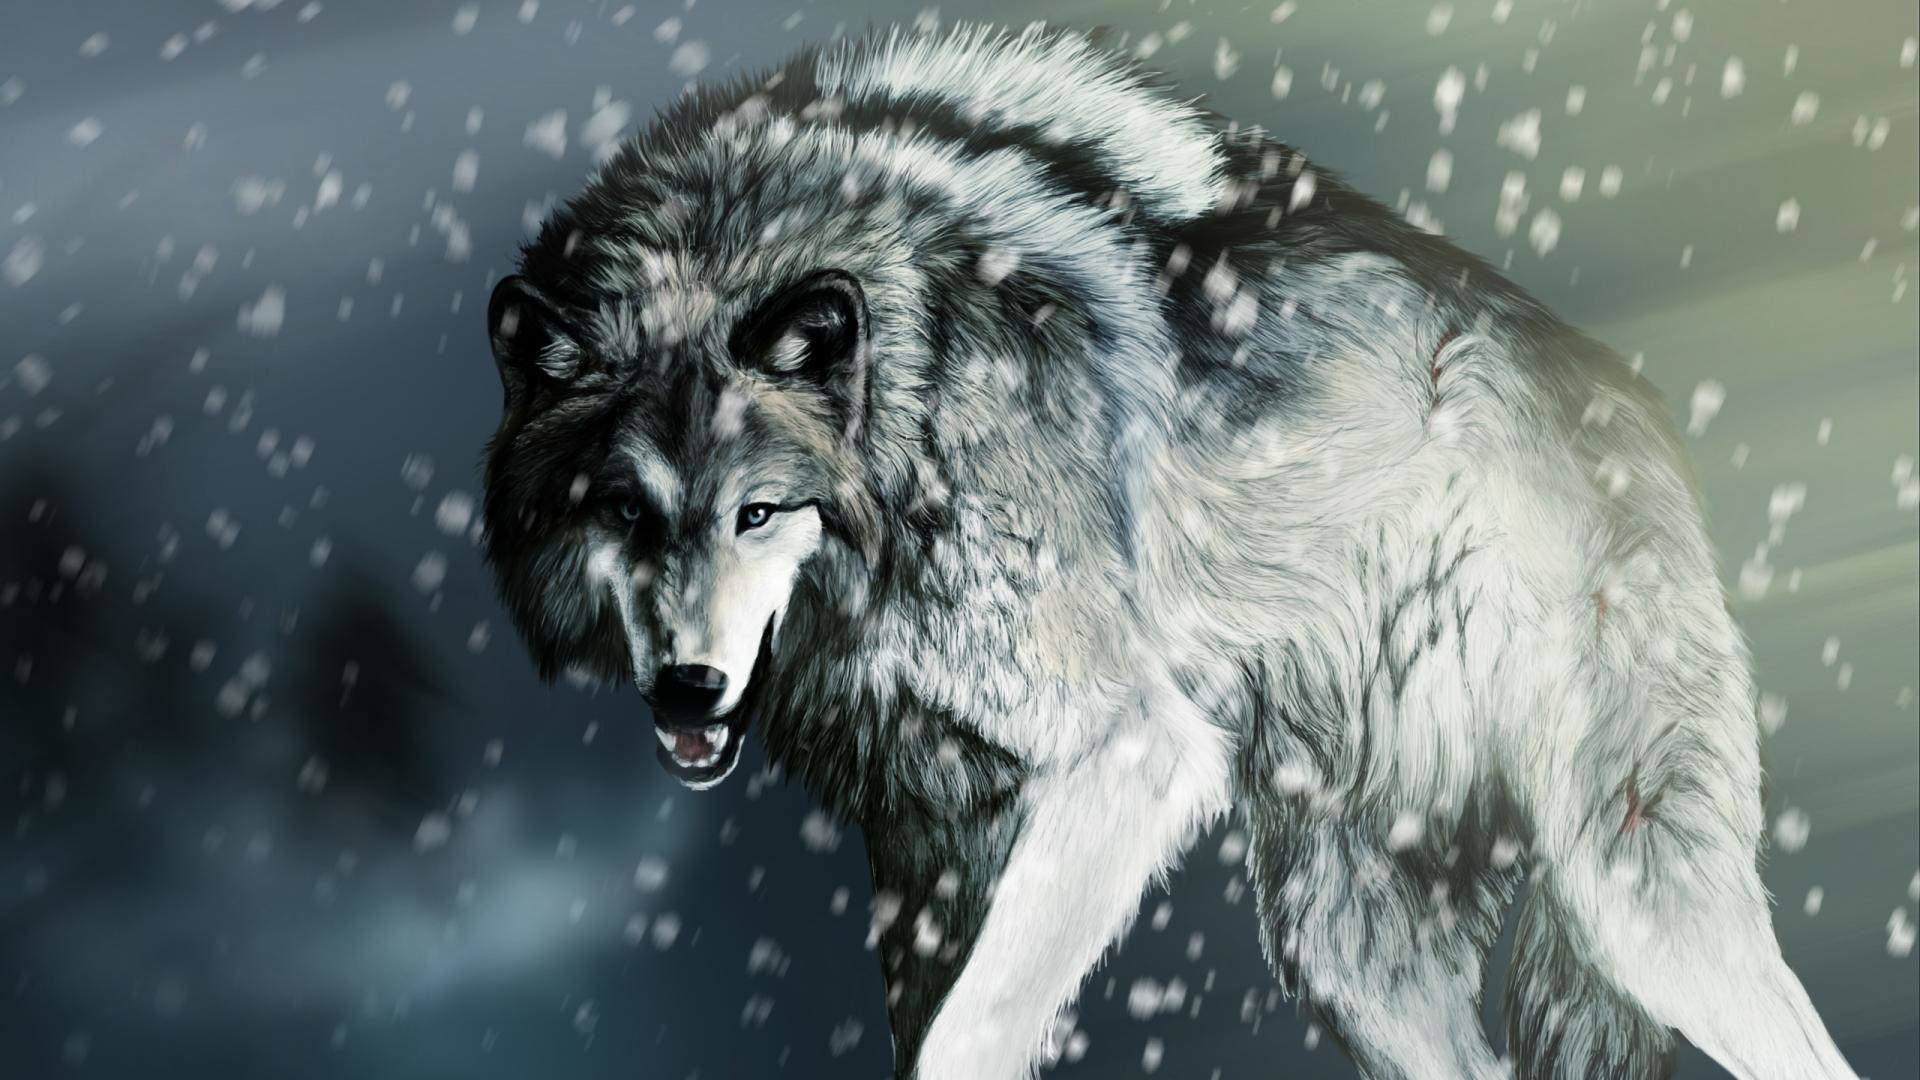 1920x1080 Angry Faced Wolf Wallpaper